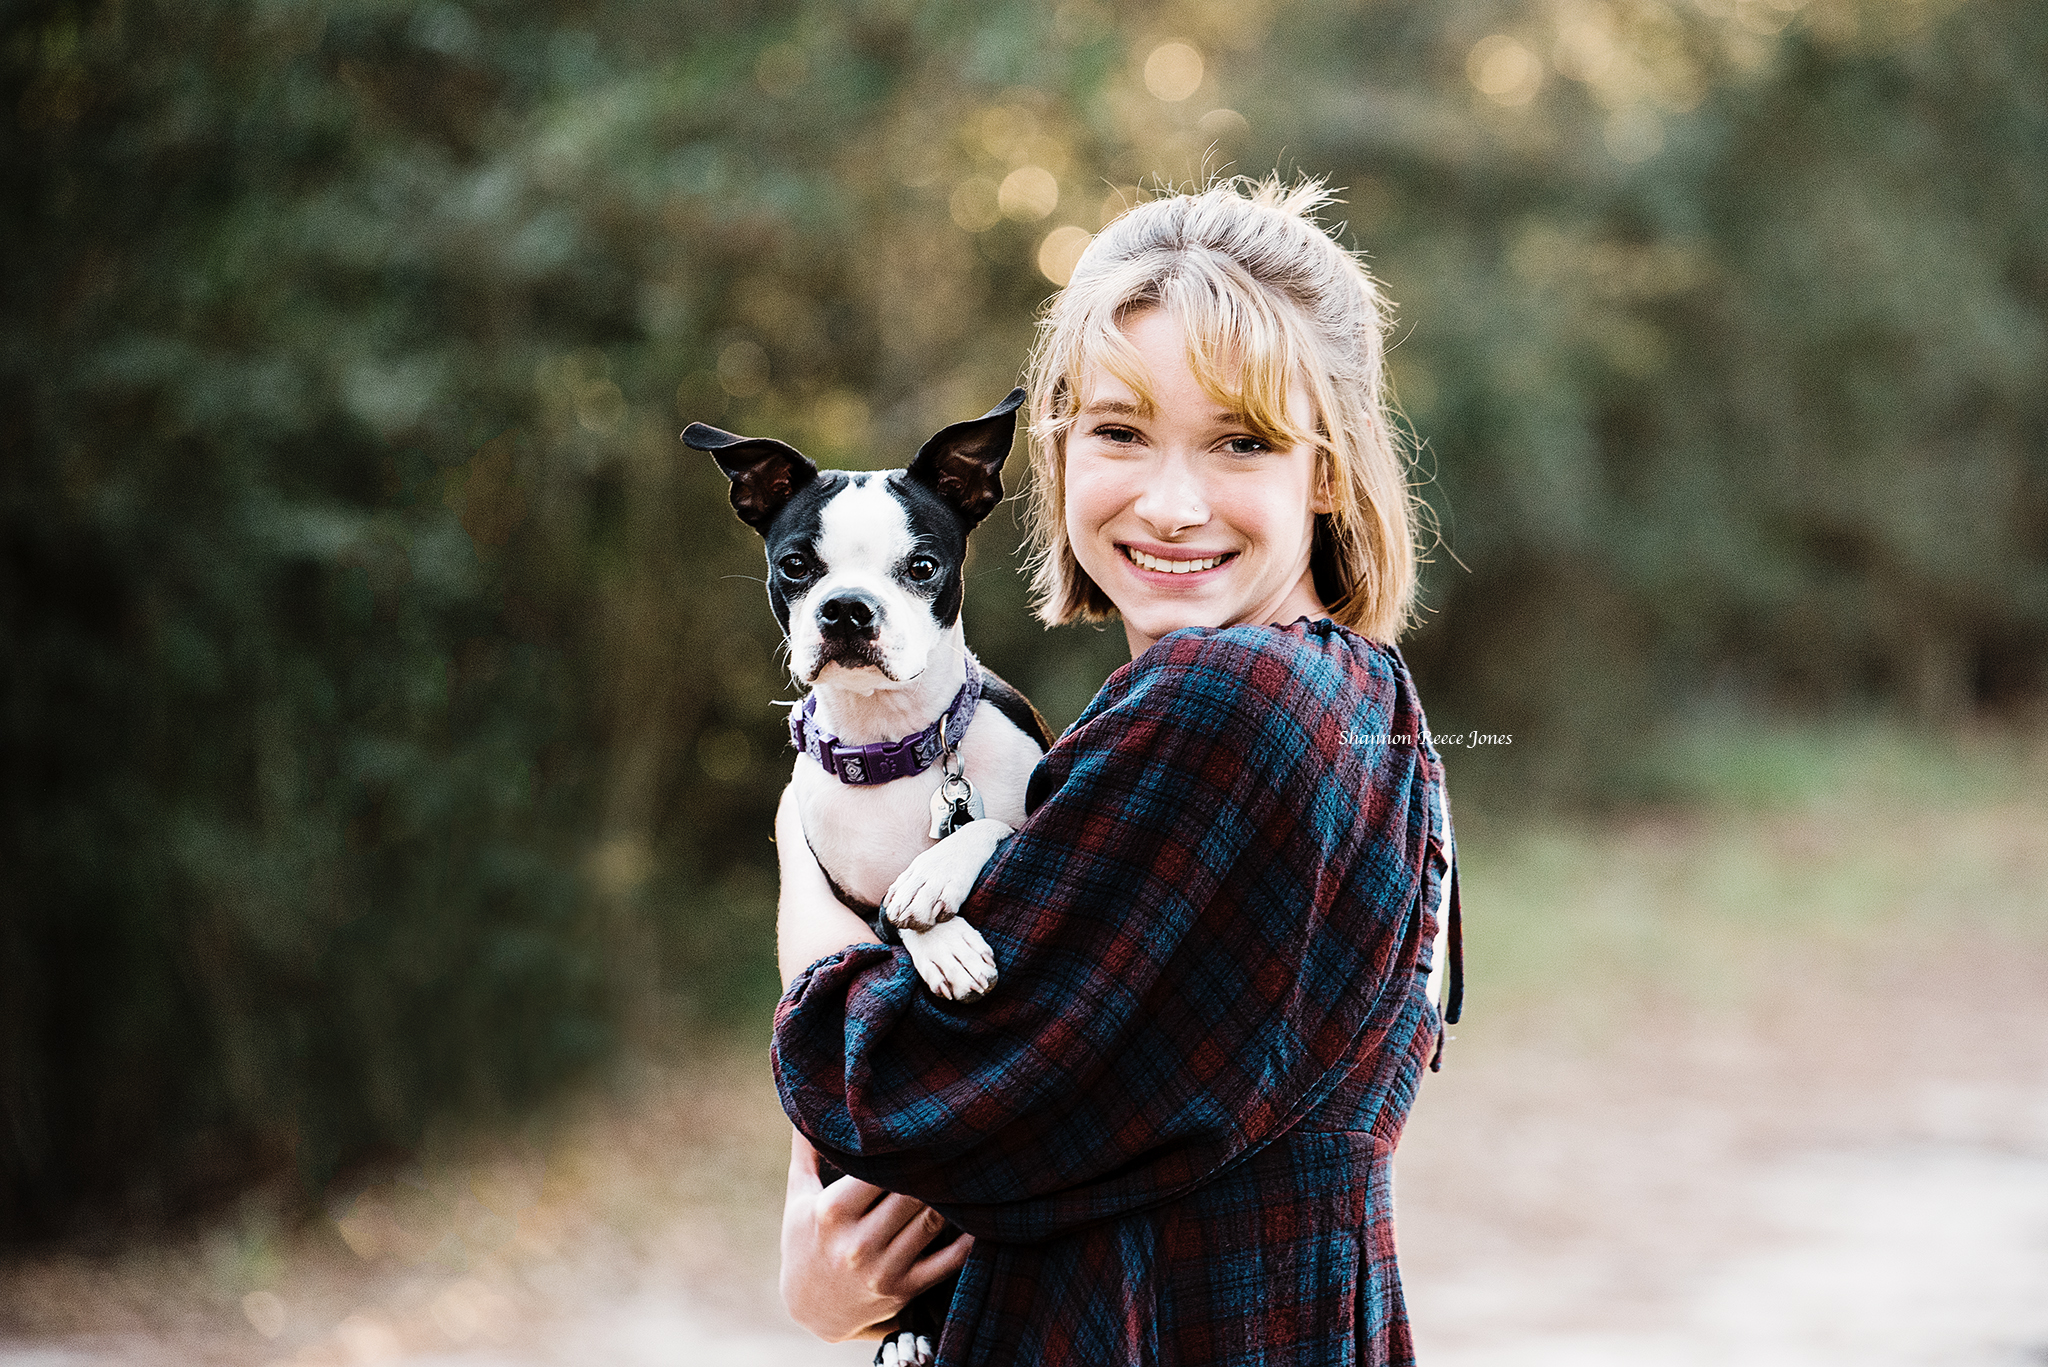 professional portrait photography, the woodlands, texas, girl holding dog